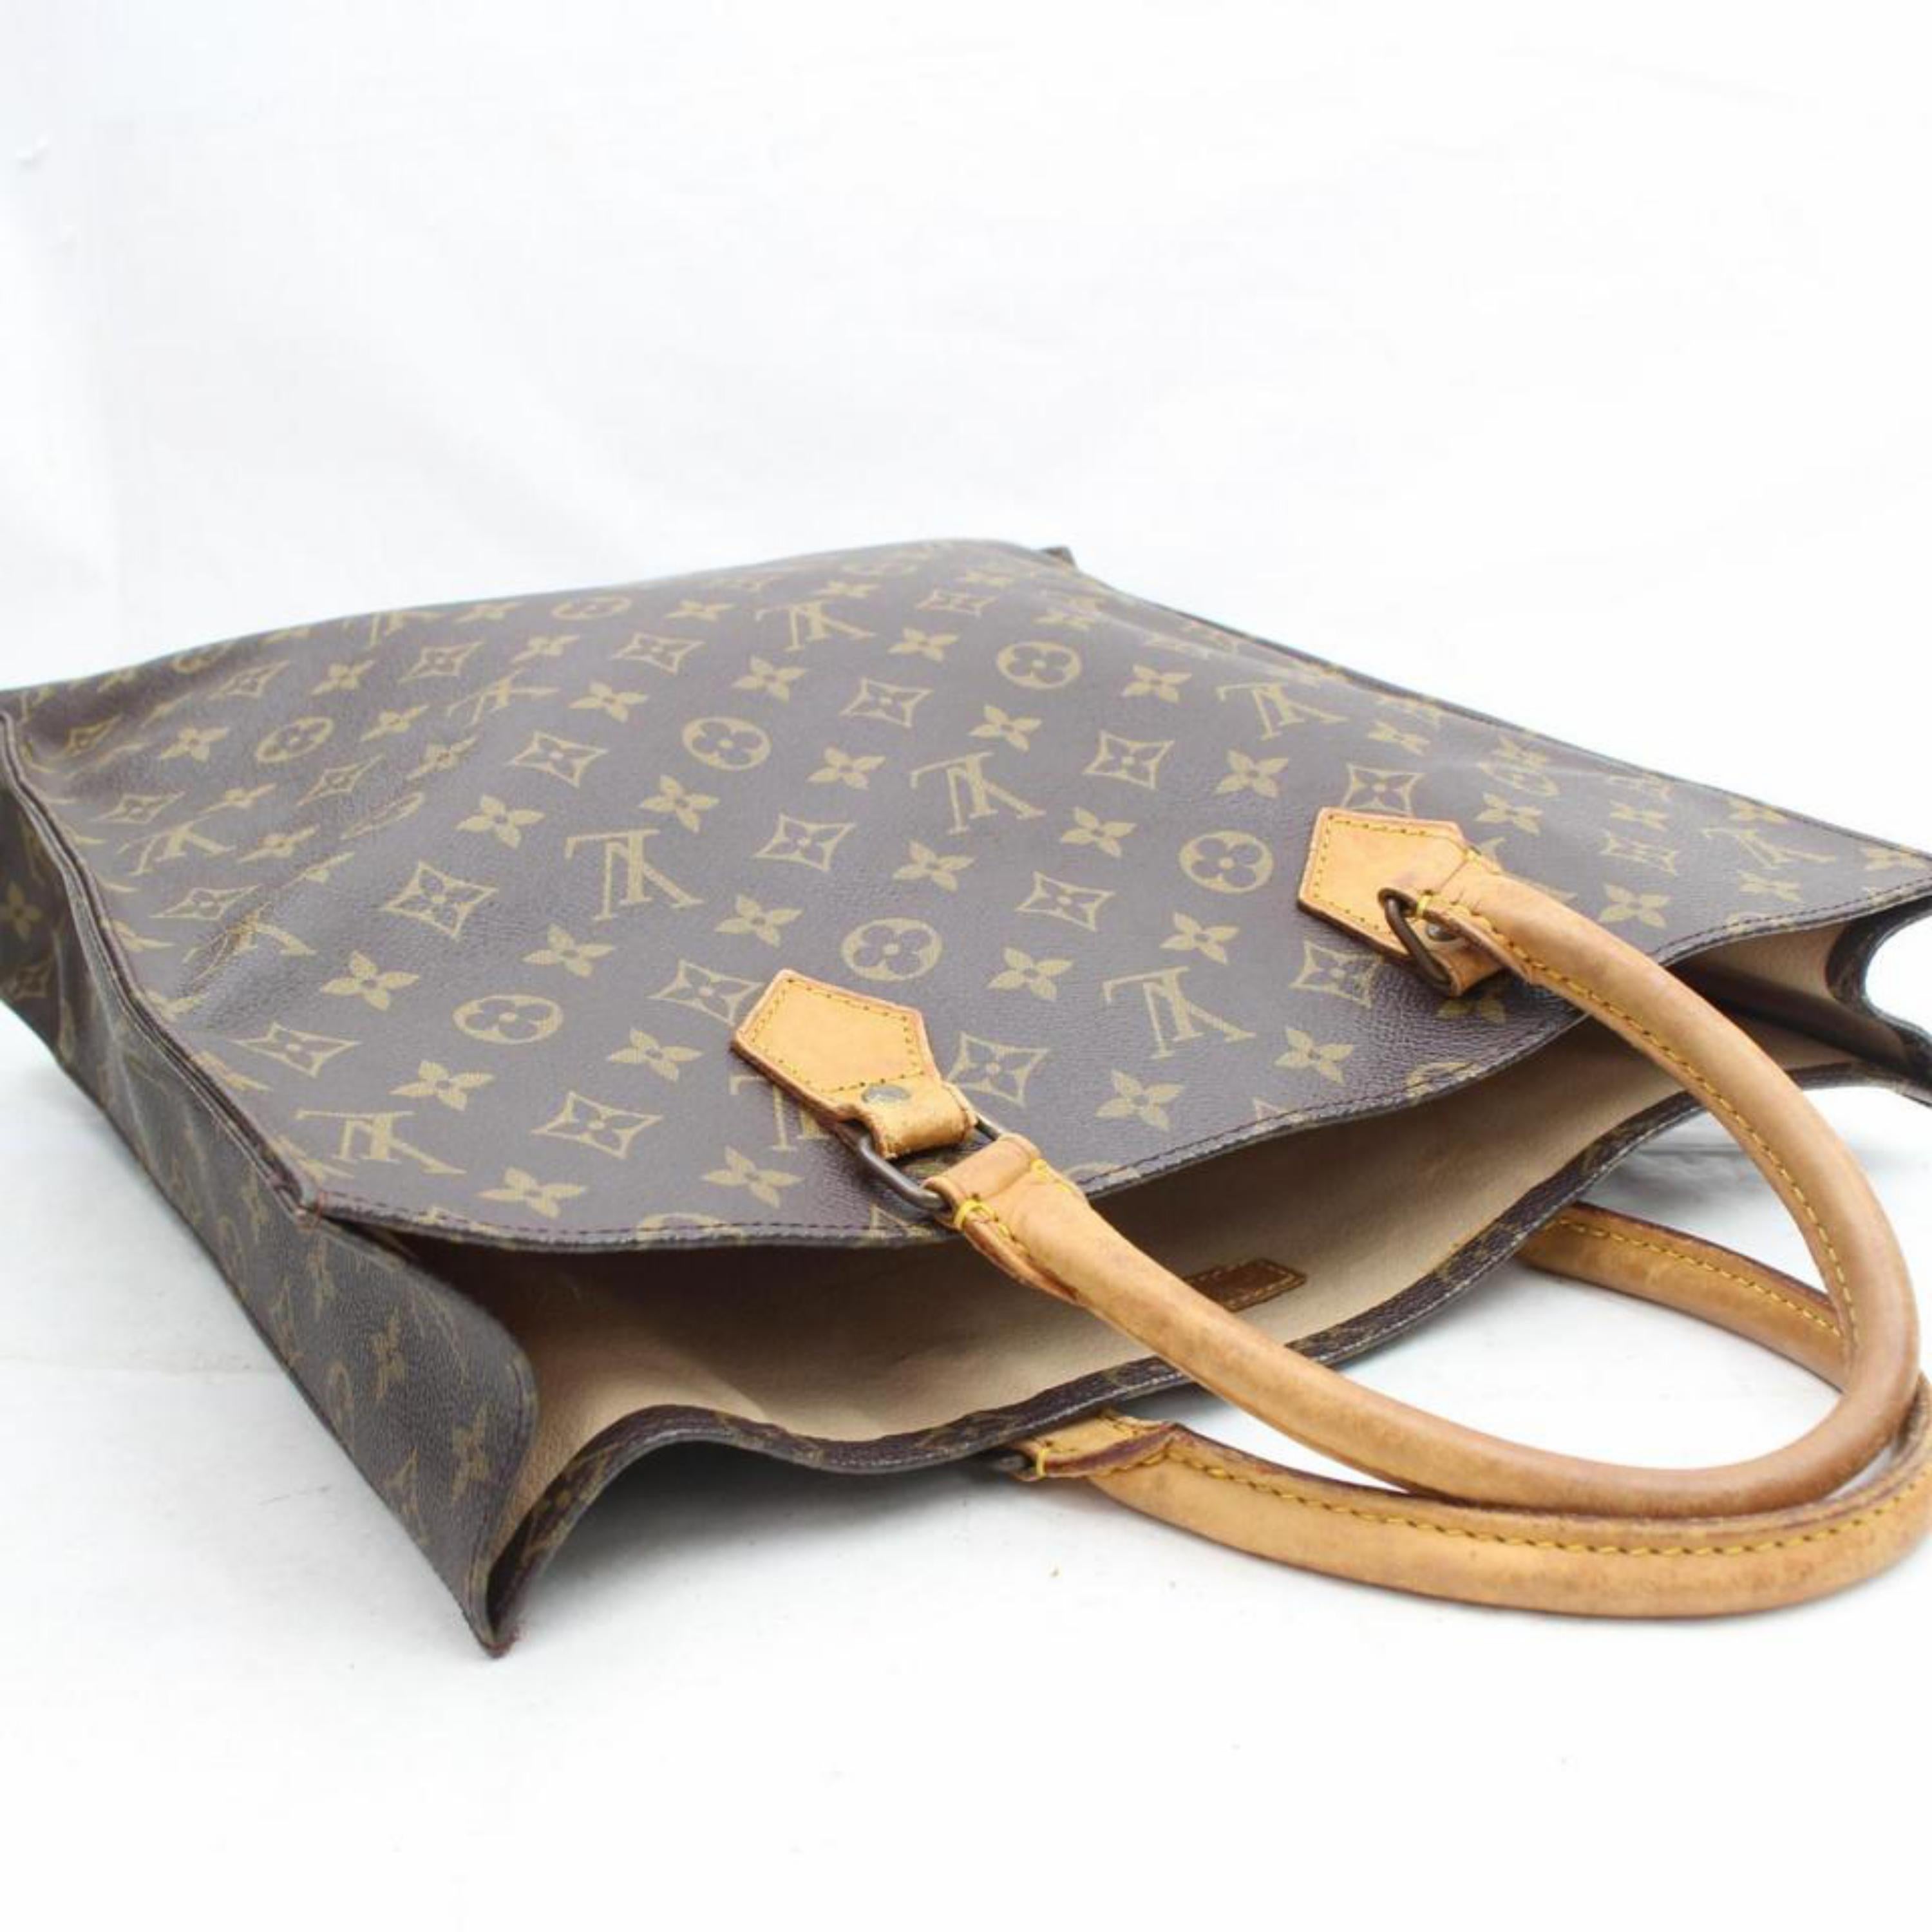 Louis Vuitton Sac Plat Monogram Shopper 869480 Brown Coated Canvas Tote In Good Condition For Sale In Forest Hills, NY